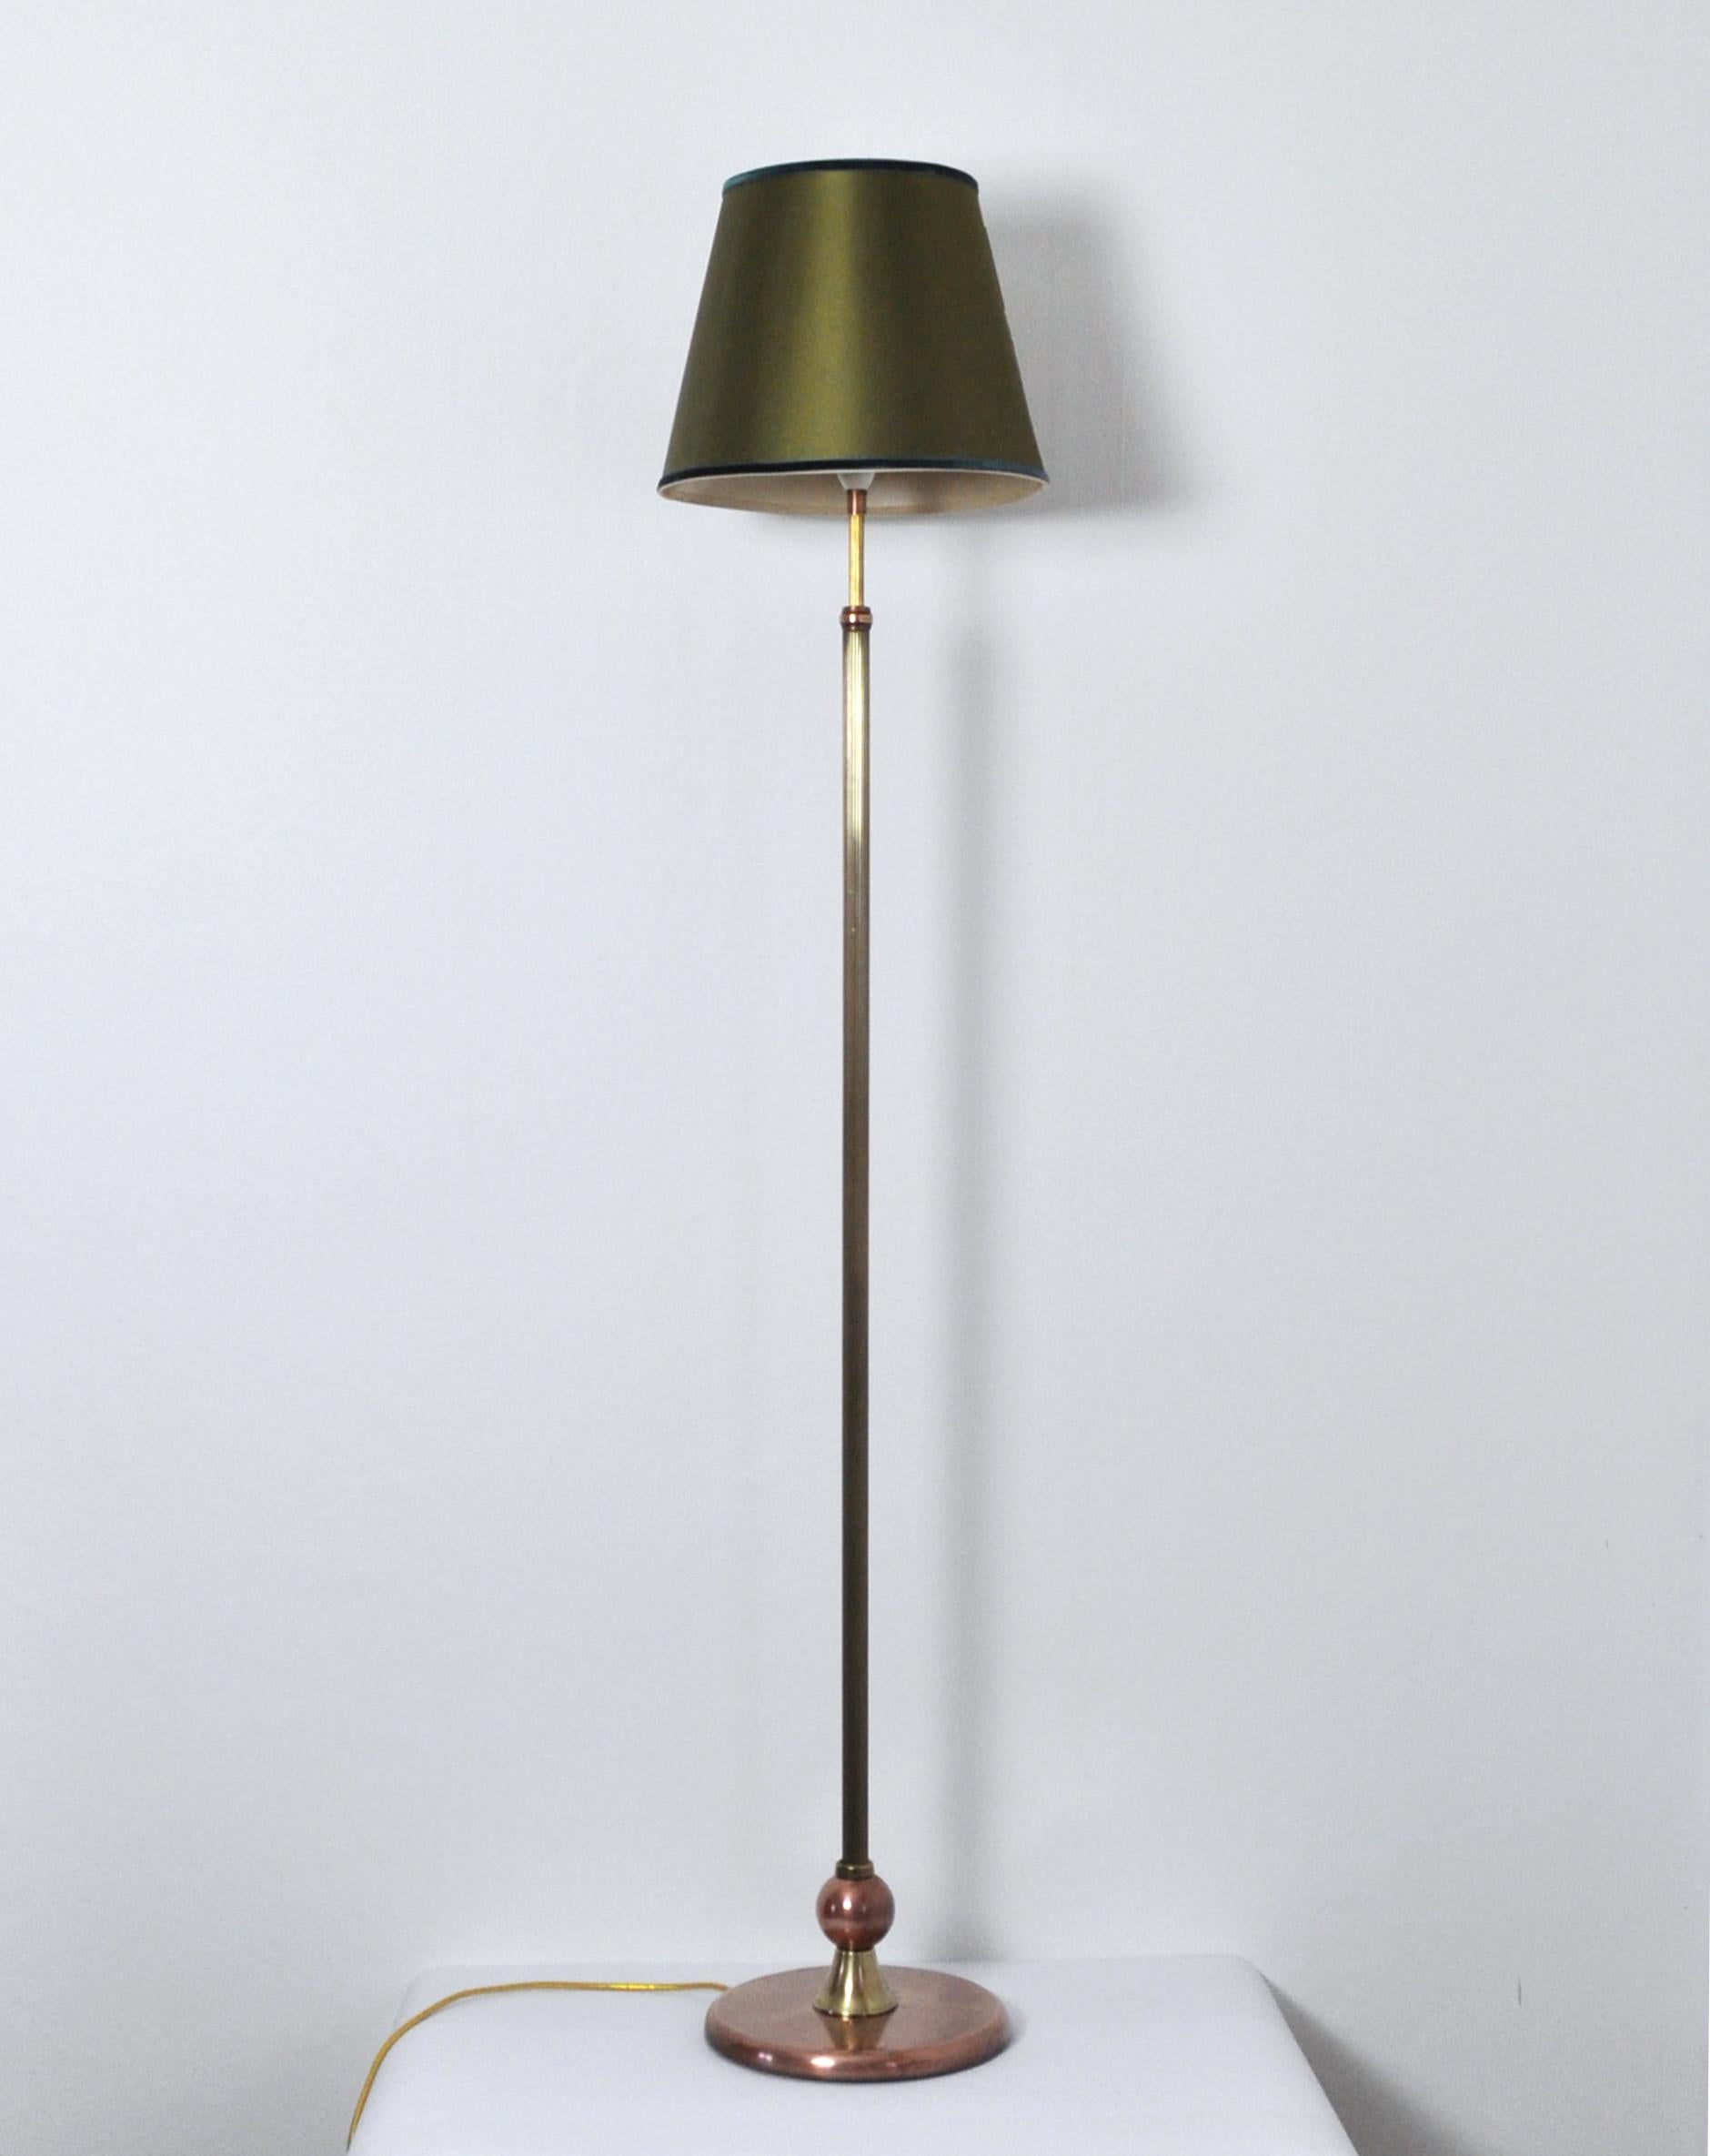 Art Deco floor lamp in brass and copper. The height can be adjusted telescopically. 
Probably made in Denmark. Polished and rewired, comes without shade. Signs of wear and use. 
Measures: 
Lamp base: diameter 26 cm, adjustable height: 142 - 173